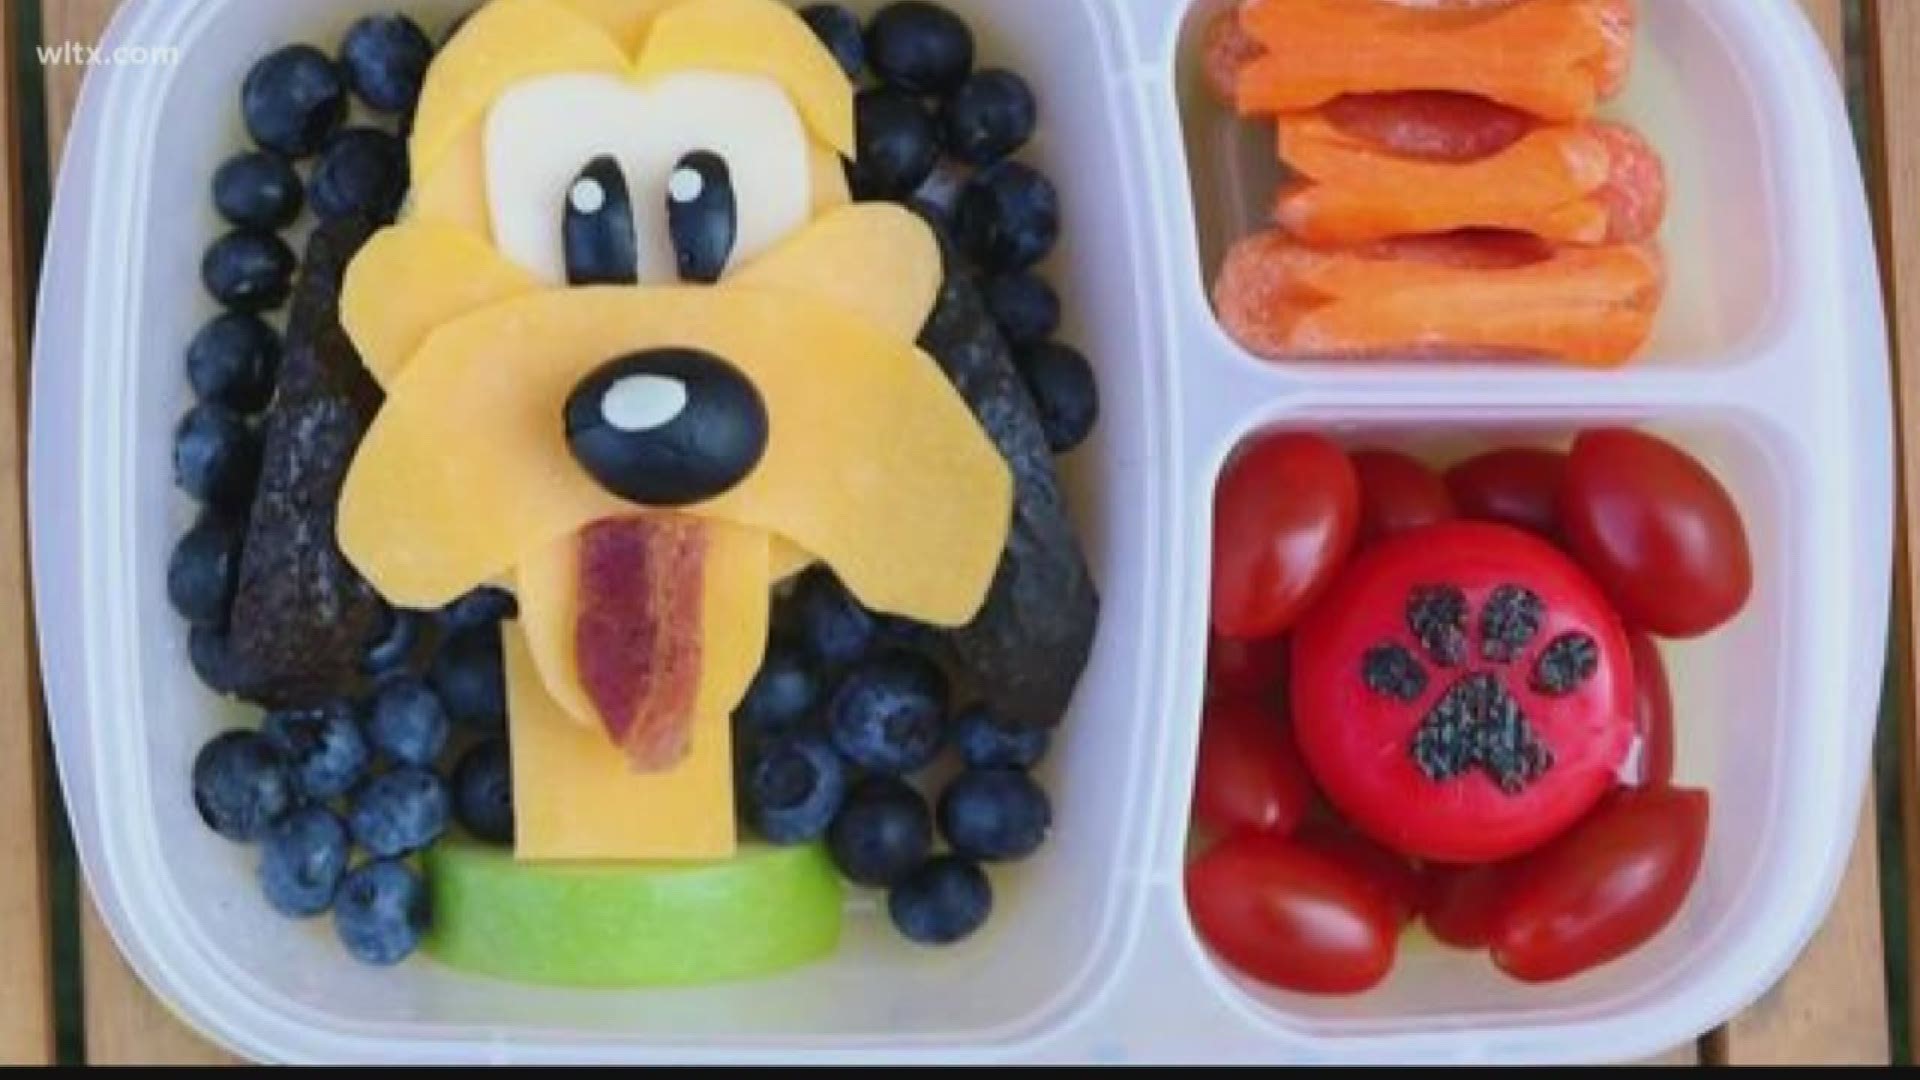 This dad designs school lunches that are almost too adorable to eat.